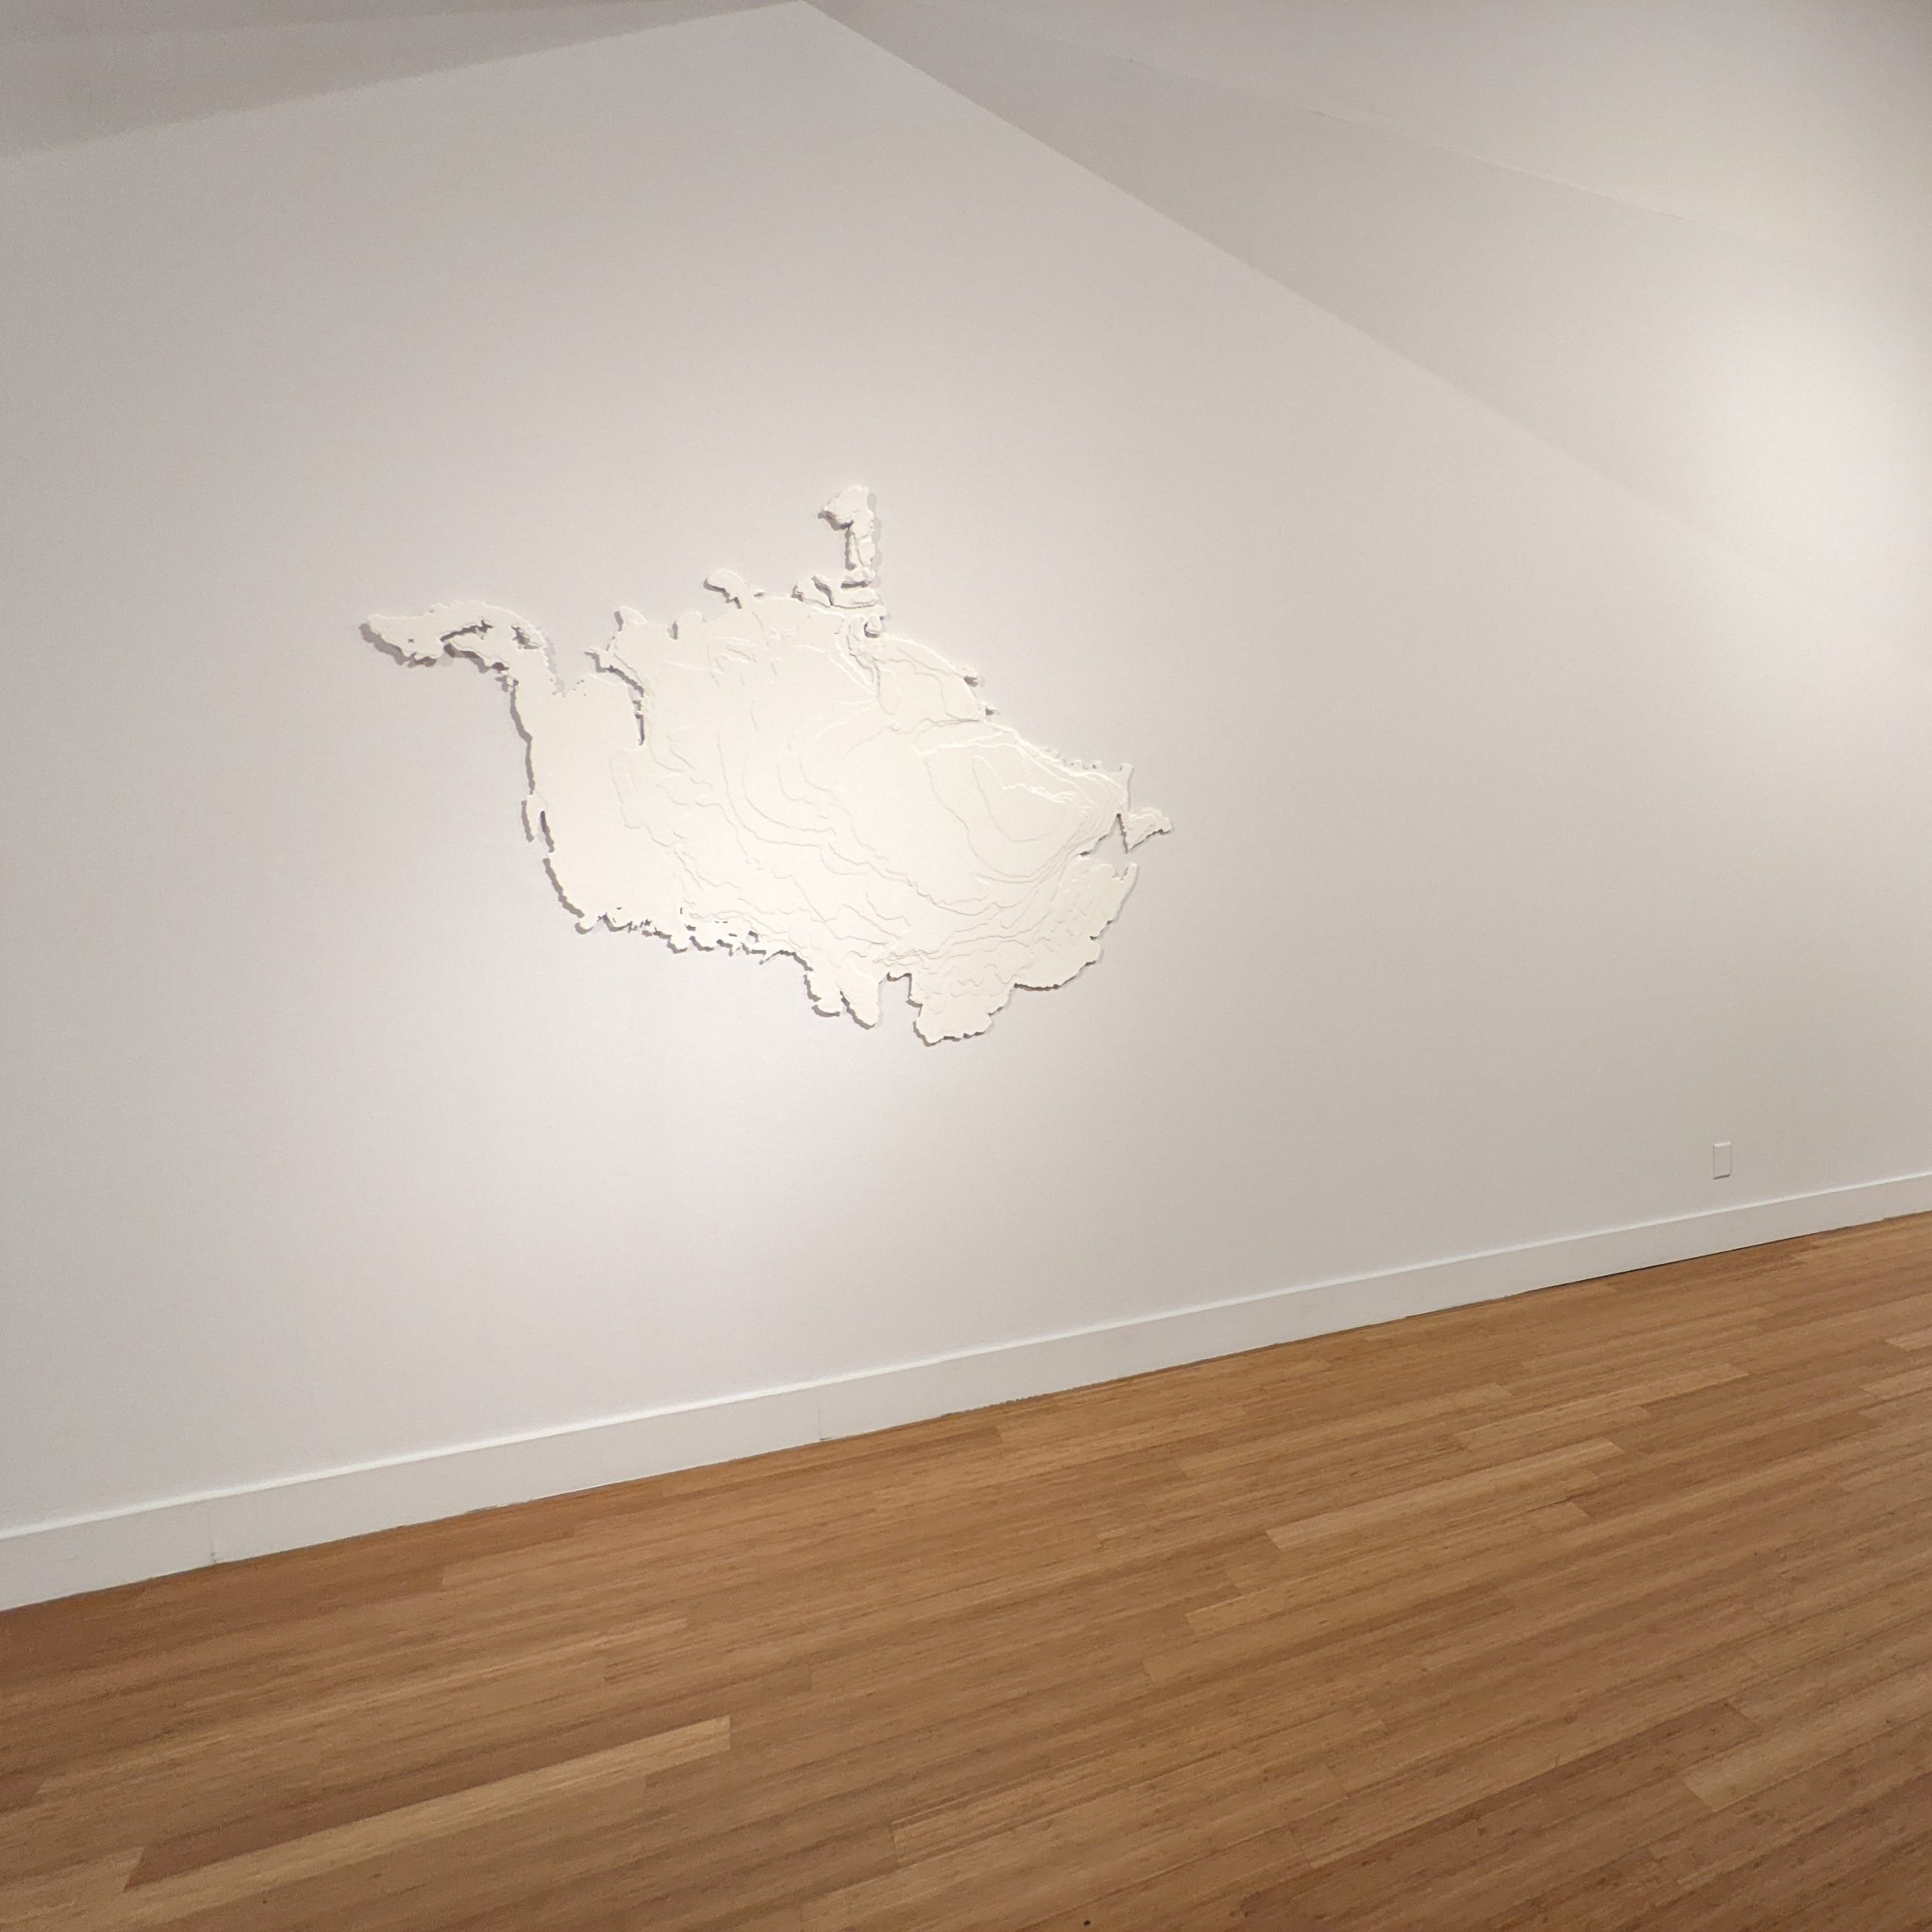 View of museum gallery interior with a white map-like form hanging on a white wall, above a hardwood floor